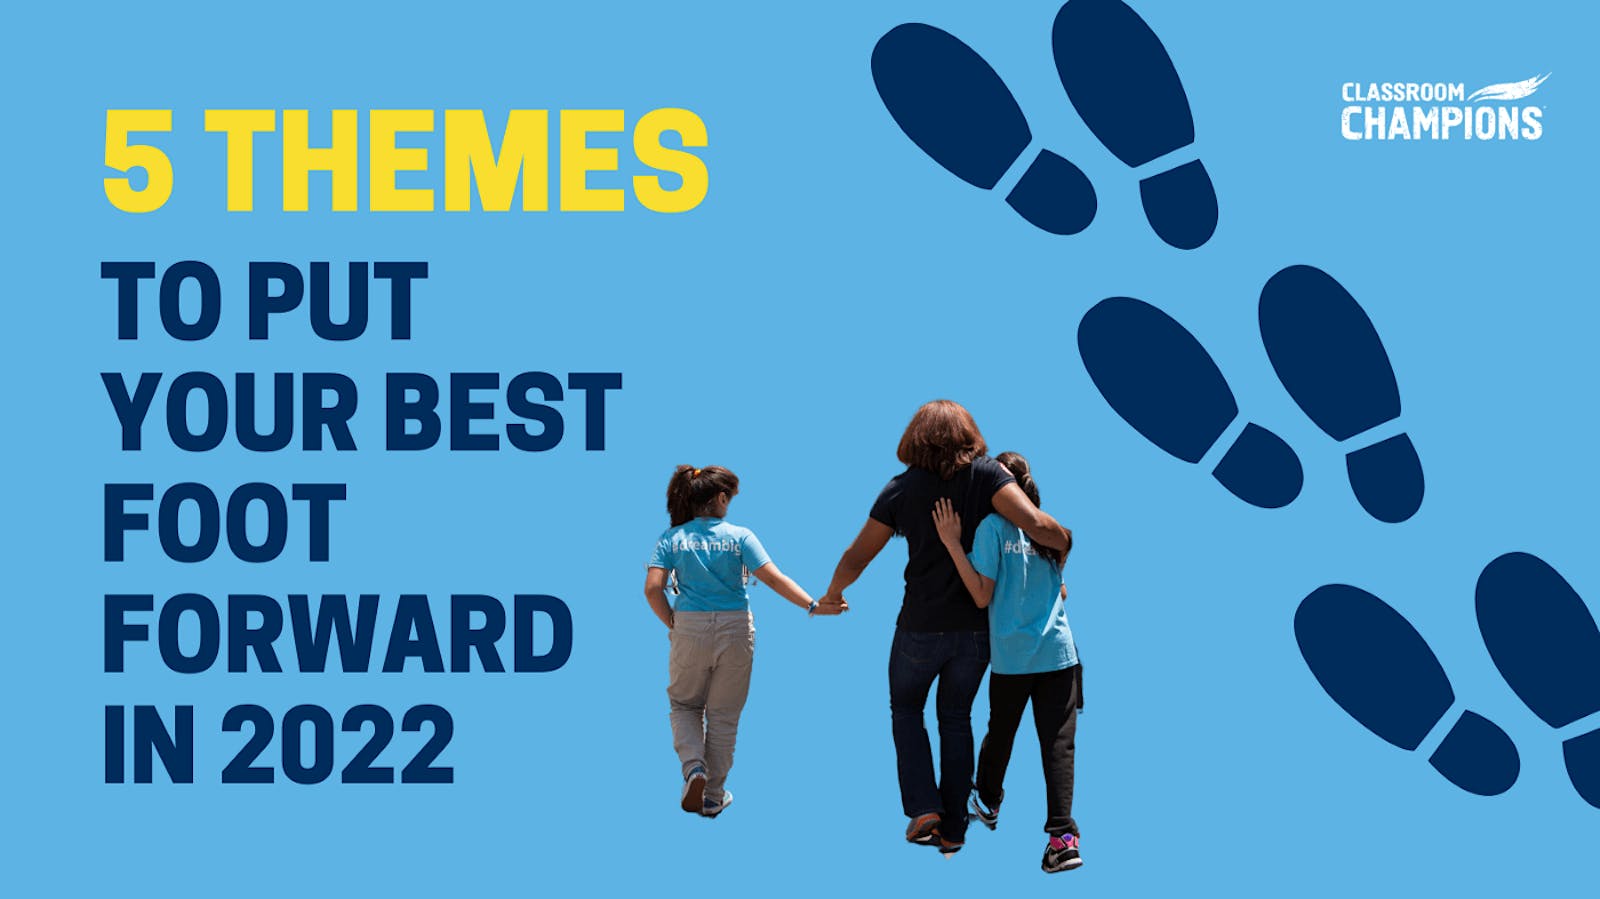 An Olympian holds a child's hand and hugs another, beside the text '5 Themes to put your best foot forward in 2022'